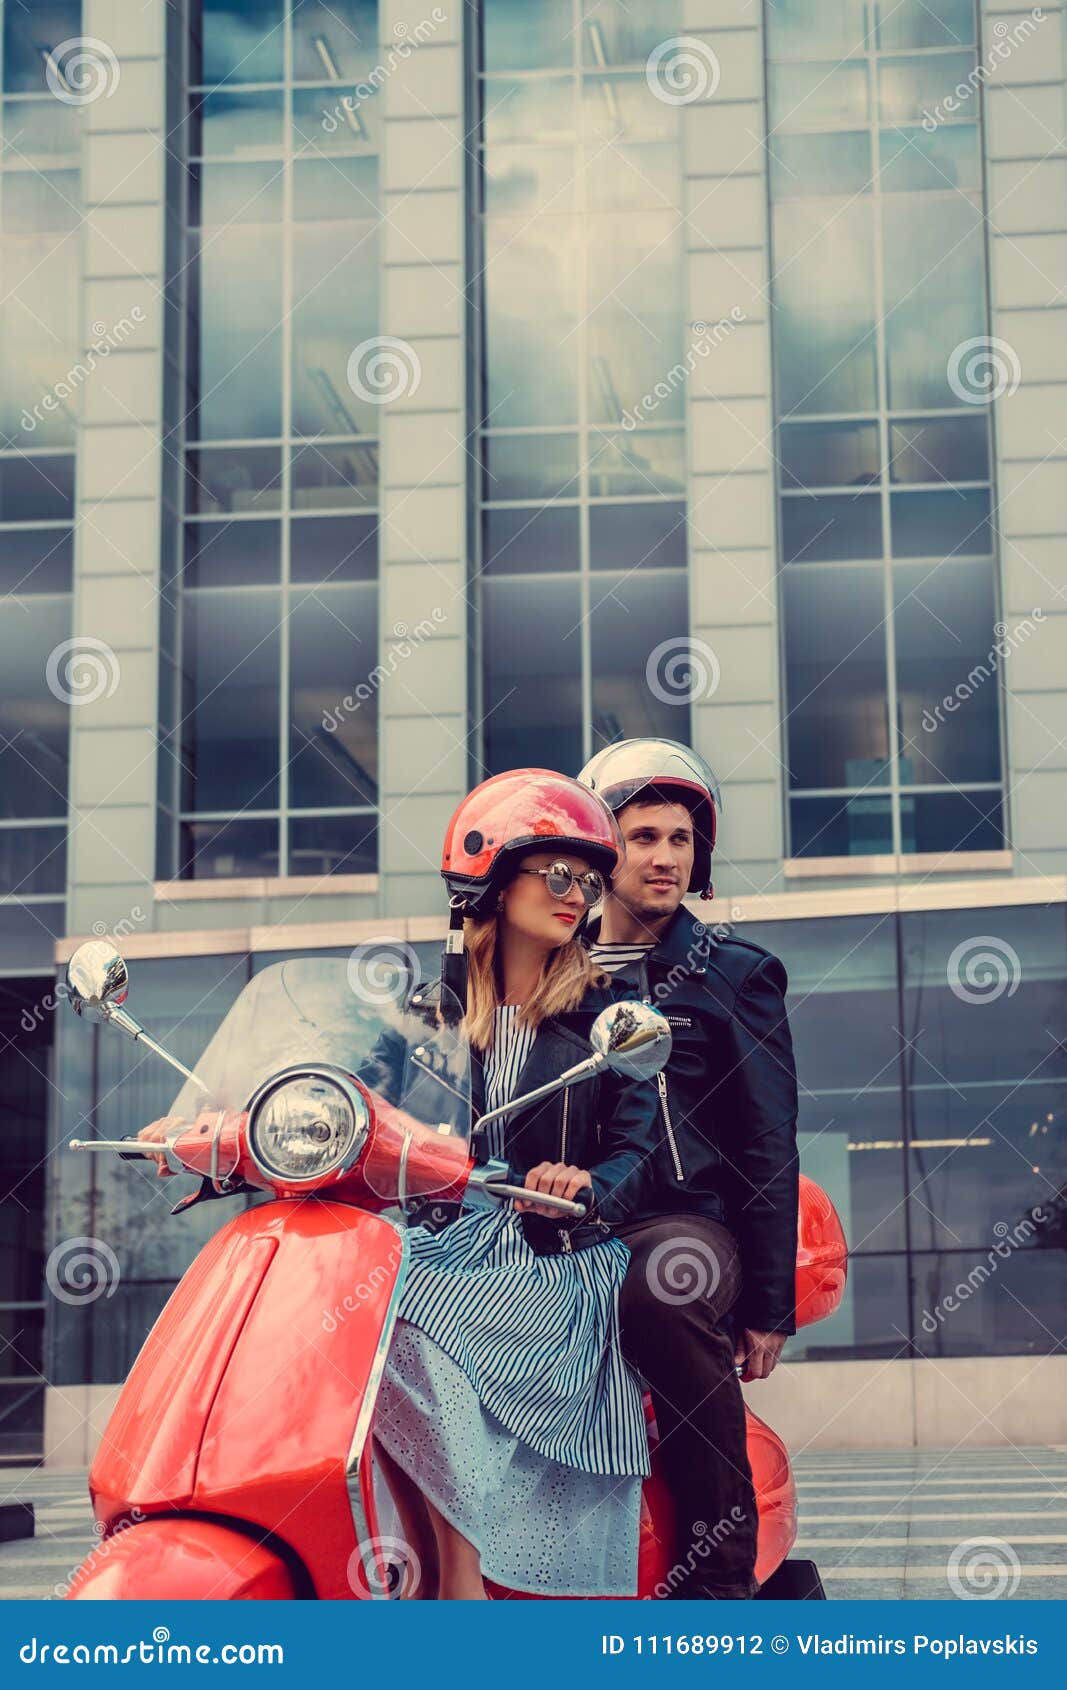 Male And Female Having Fun On Moto Scooter Stock Photo I